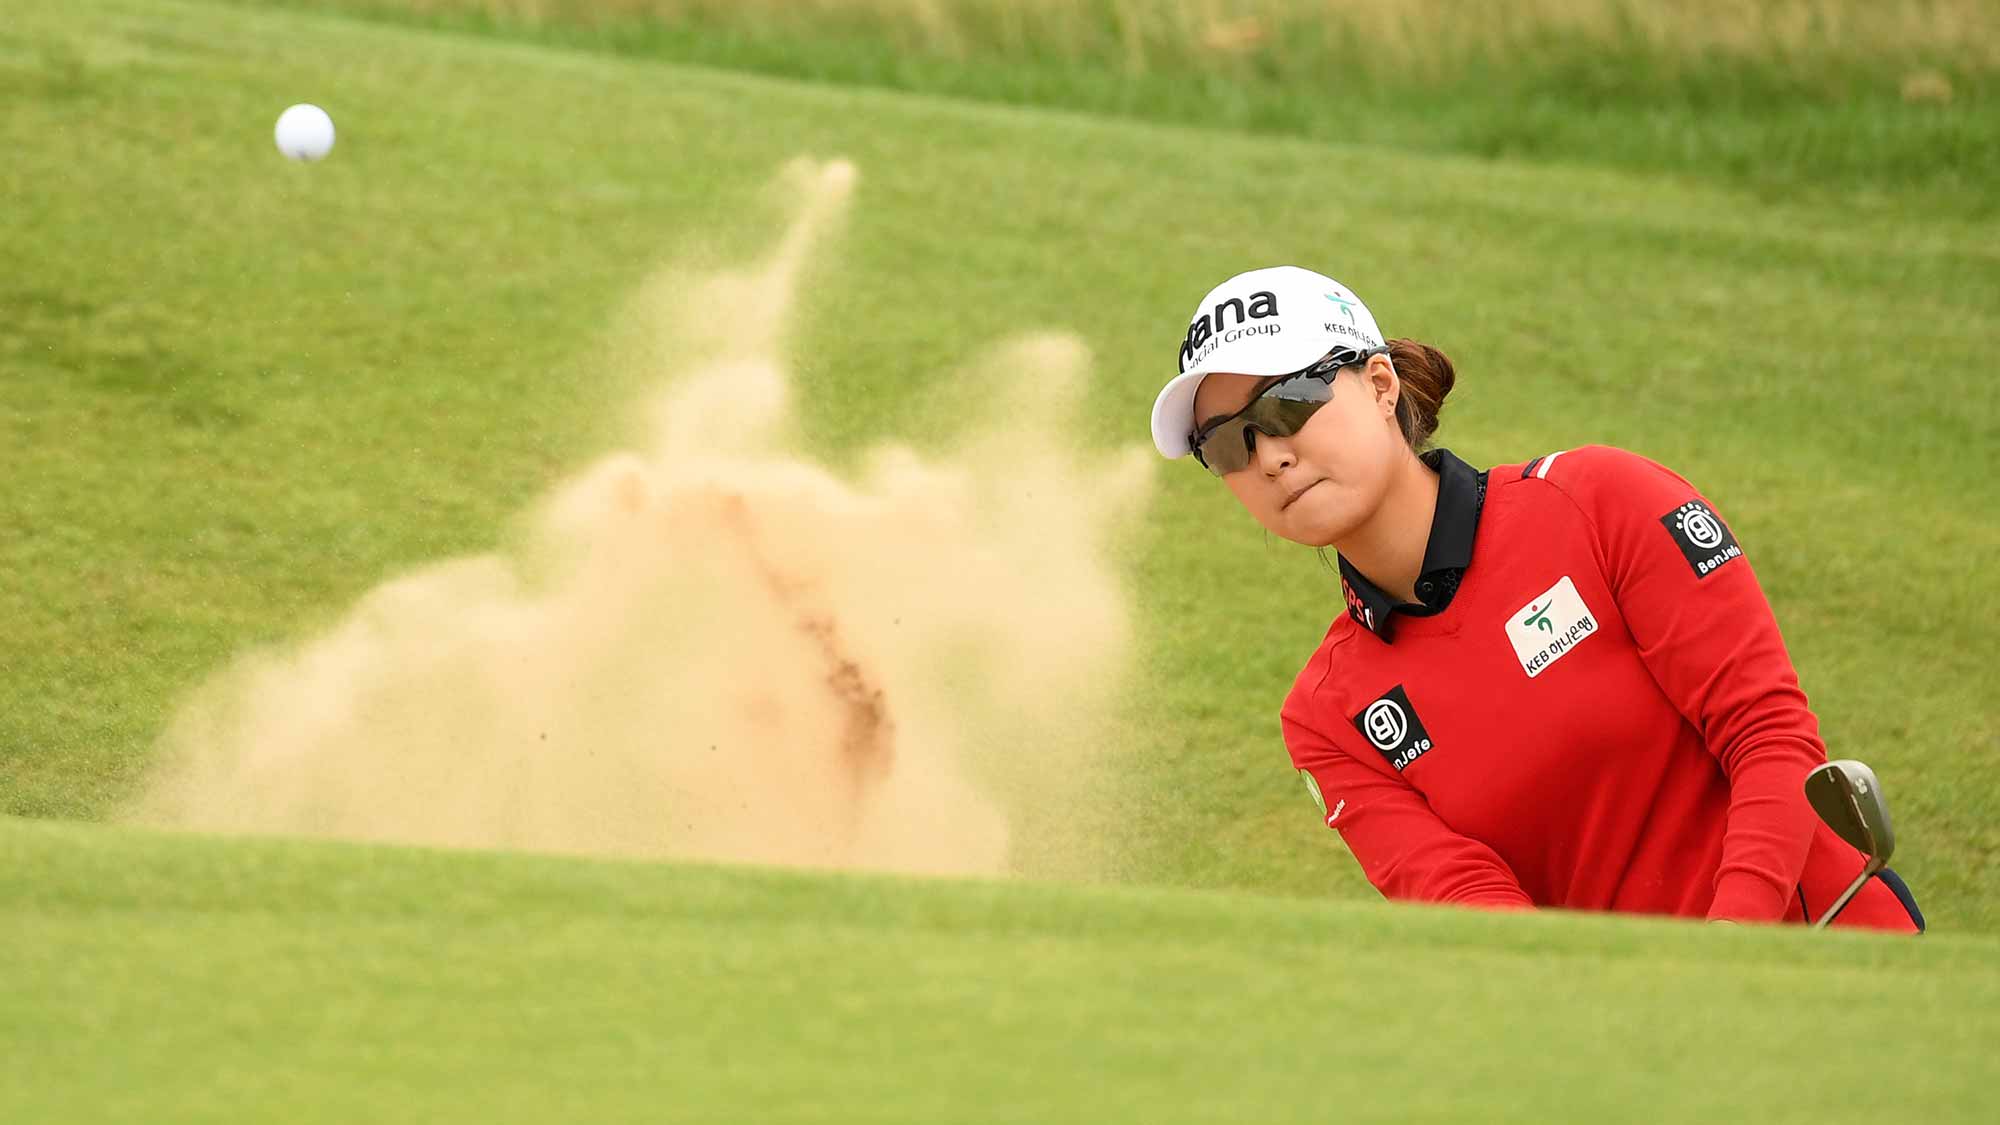 Minjee Lee of Australia plays her third shot on the 3rd hole during day three of Ricoh Women's British Open at Royal Lytham & St. Annes on August 4, 2018 in Lytham St Annes, England